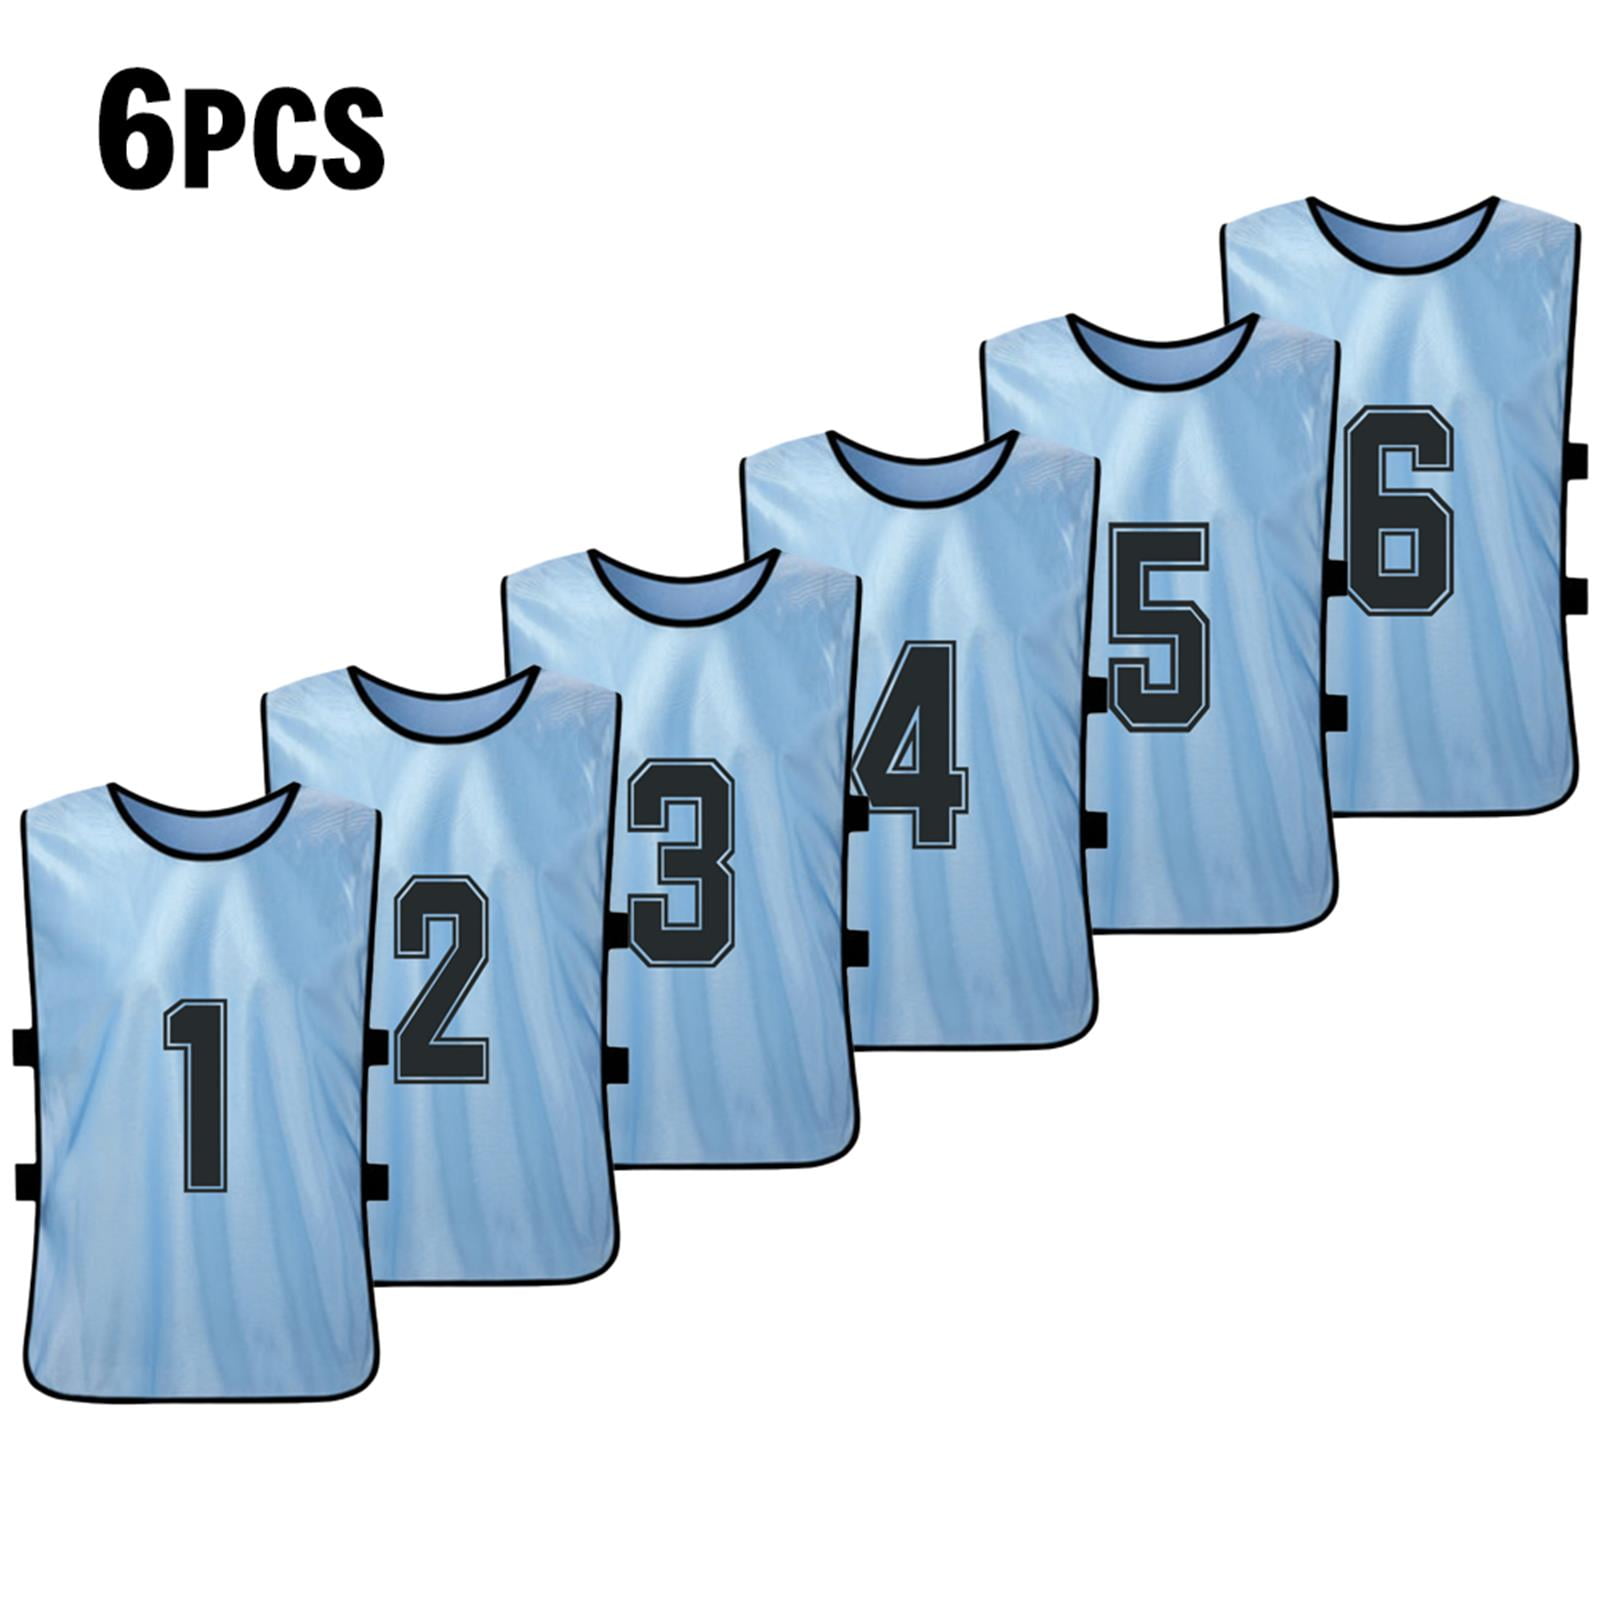 Details about   6PCS Kid's Football Pinnies Quick Drying Soccer Jerseys Youth Sports J4F8 